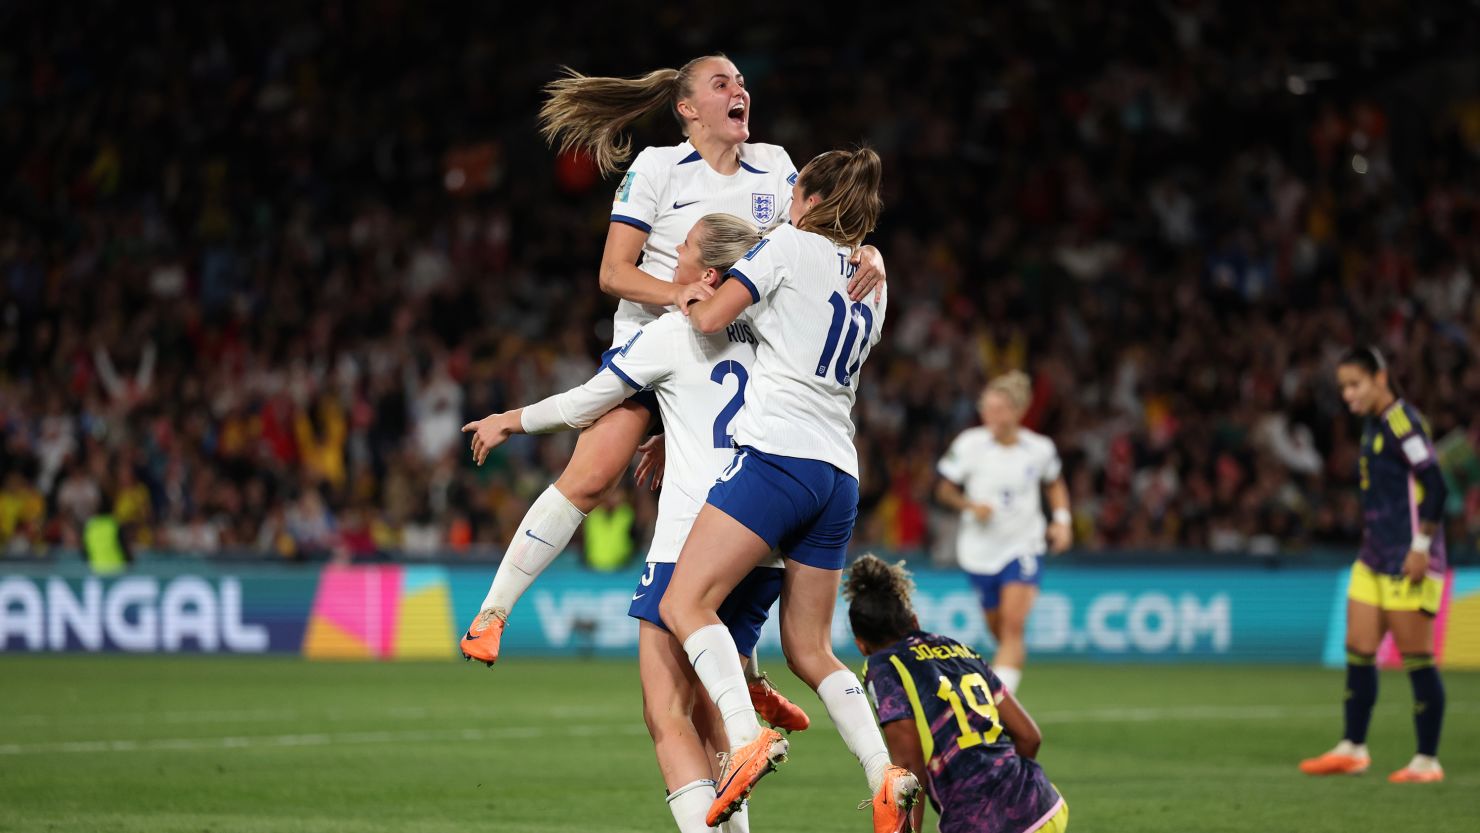 England reached the Women's World Cup semifinals after narrowly beating Colombia.